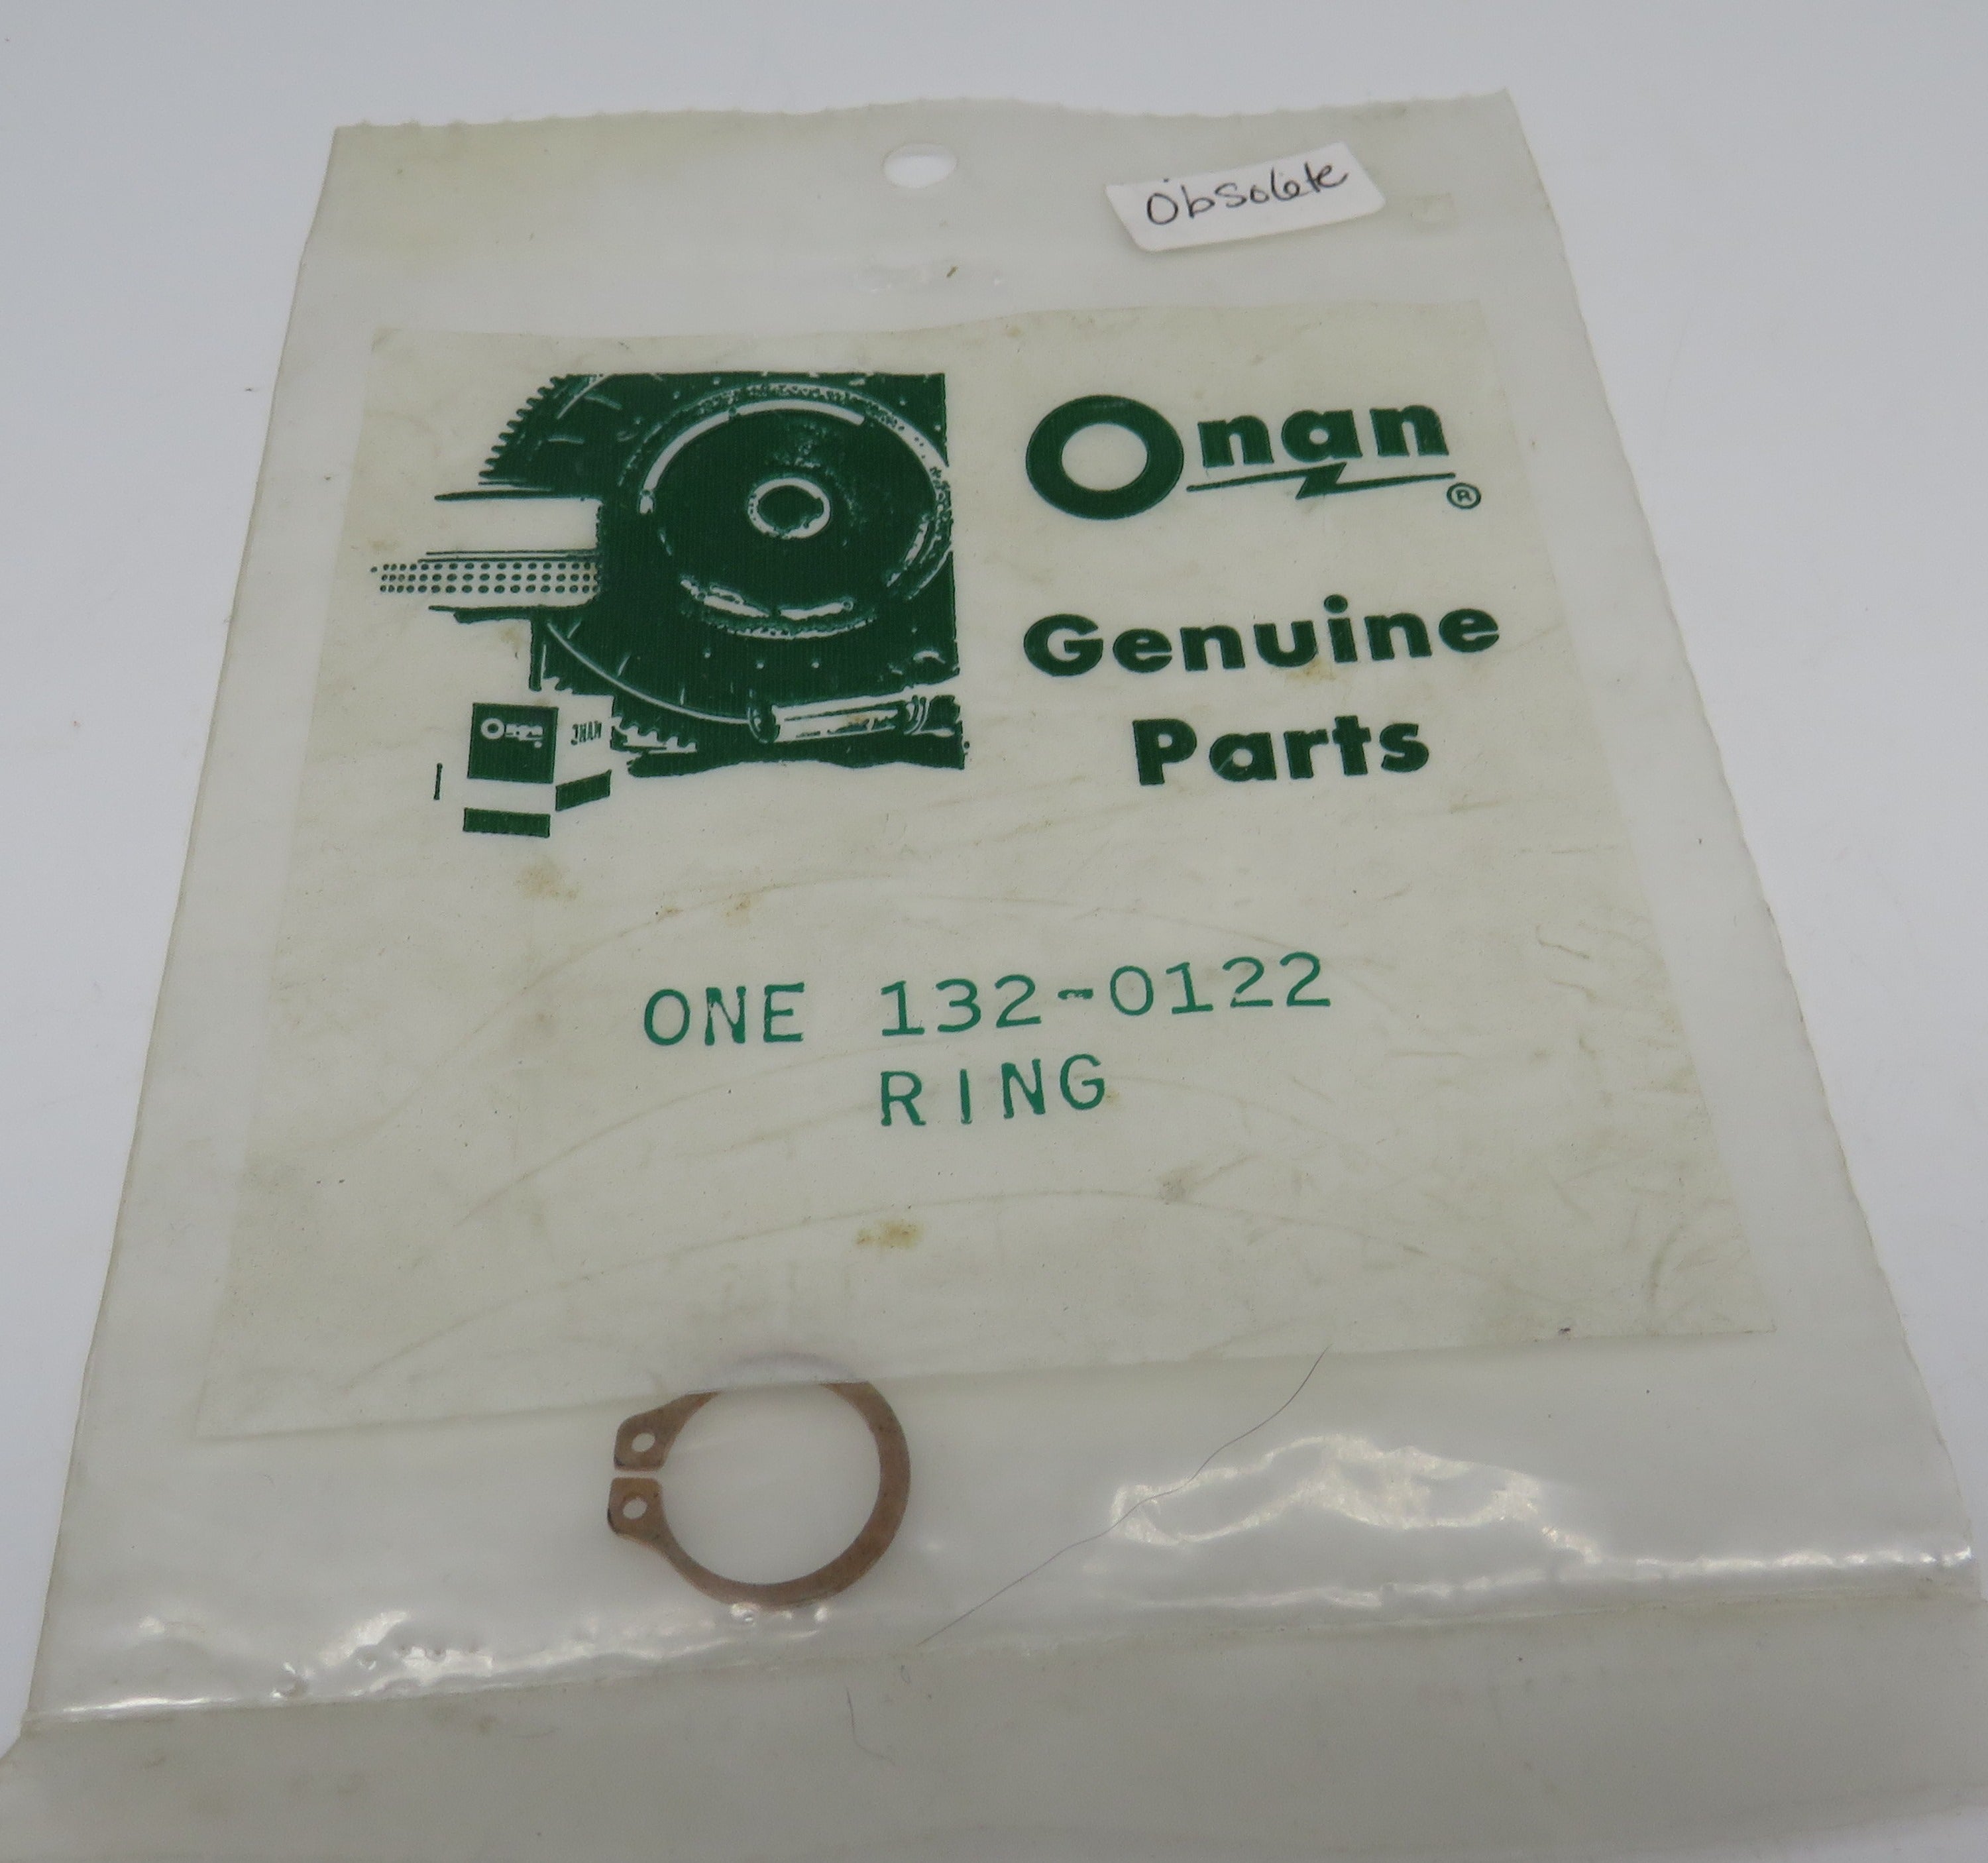 132-0122 Onan Ring OBSOLETE Used on Water Pump 132-0251 & 132-0115; Also Sherwood 5484 3/7/2024 THIS PART IS IN STOCK 3/7/2024